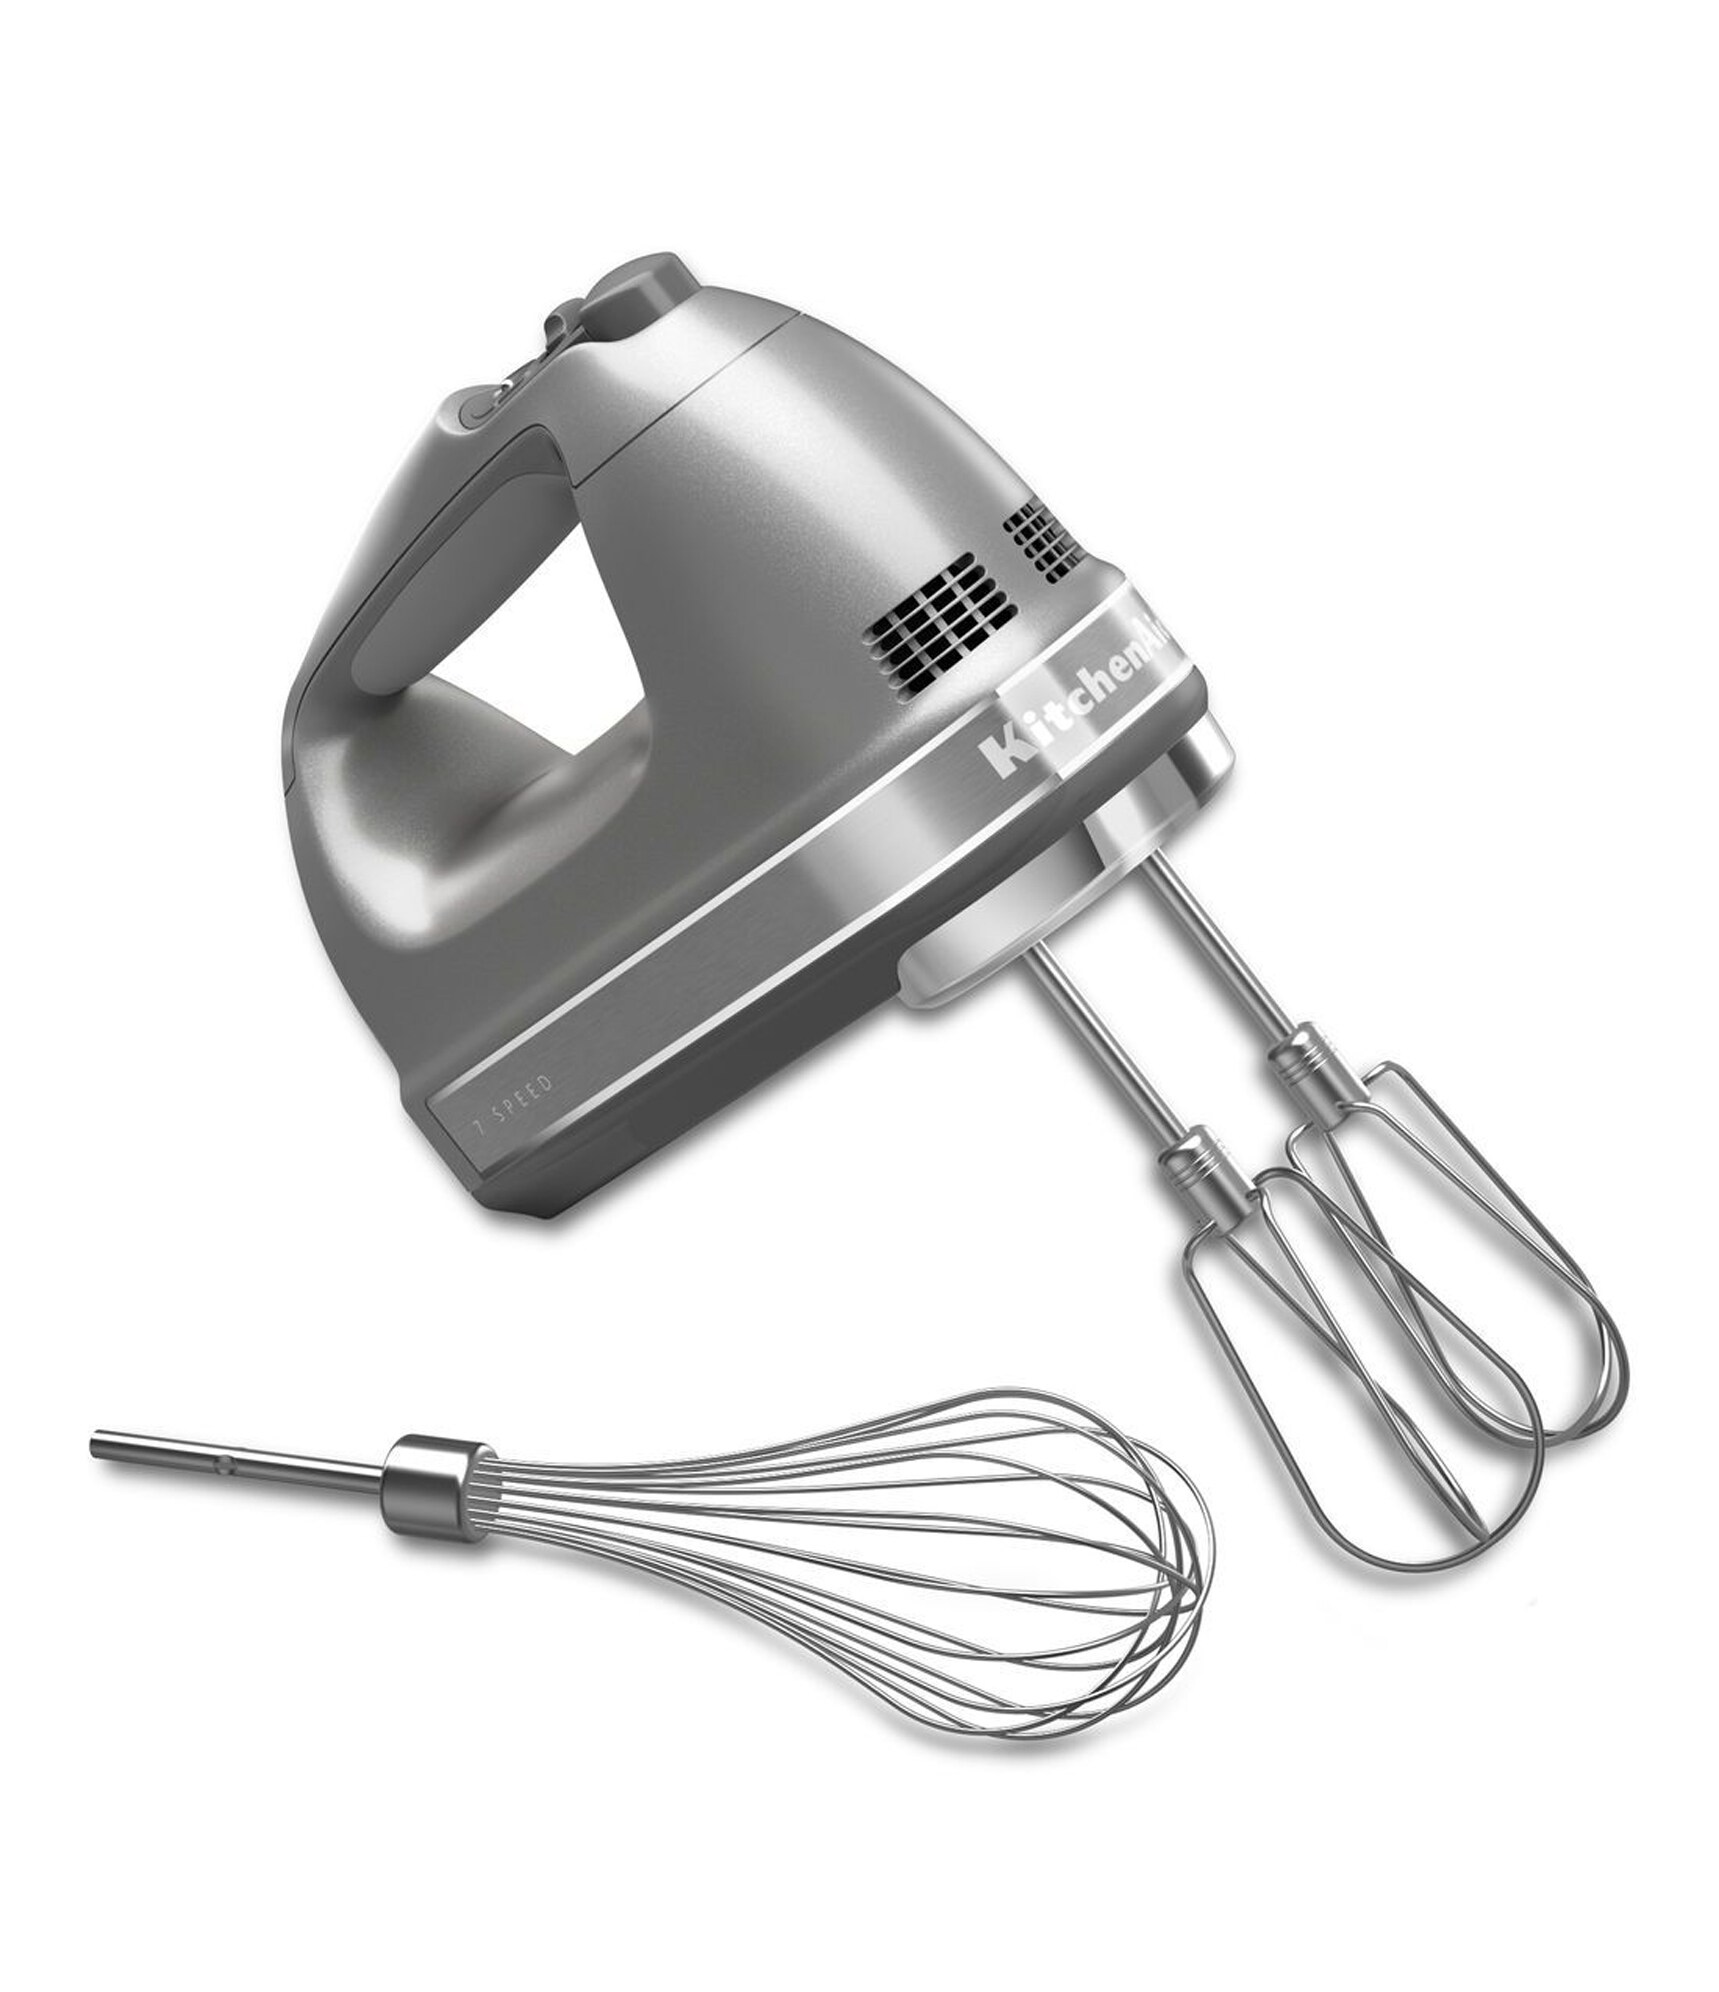 Including 2 Mixers and 2 Dough Hooks Electric Hand Mixers for Kitchen Beating Eggs Cakes 7-Speed Small Stainless Steel Hand Mixer with Turbo and Convenient Eject Button Handheld Mixers Electric